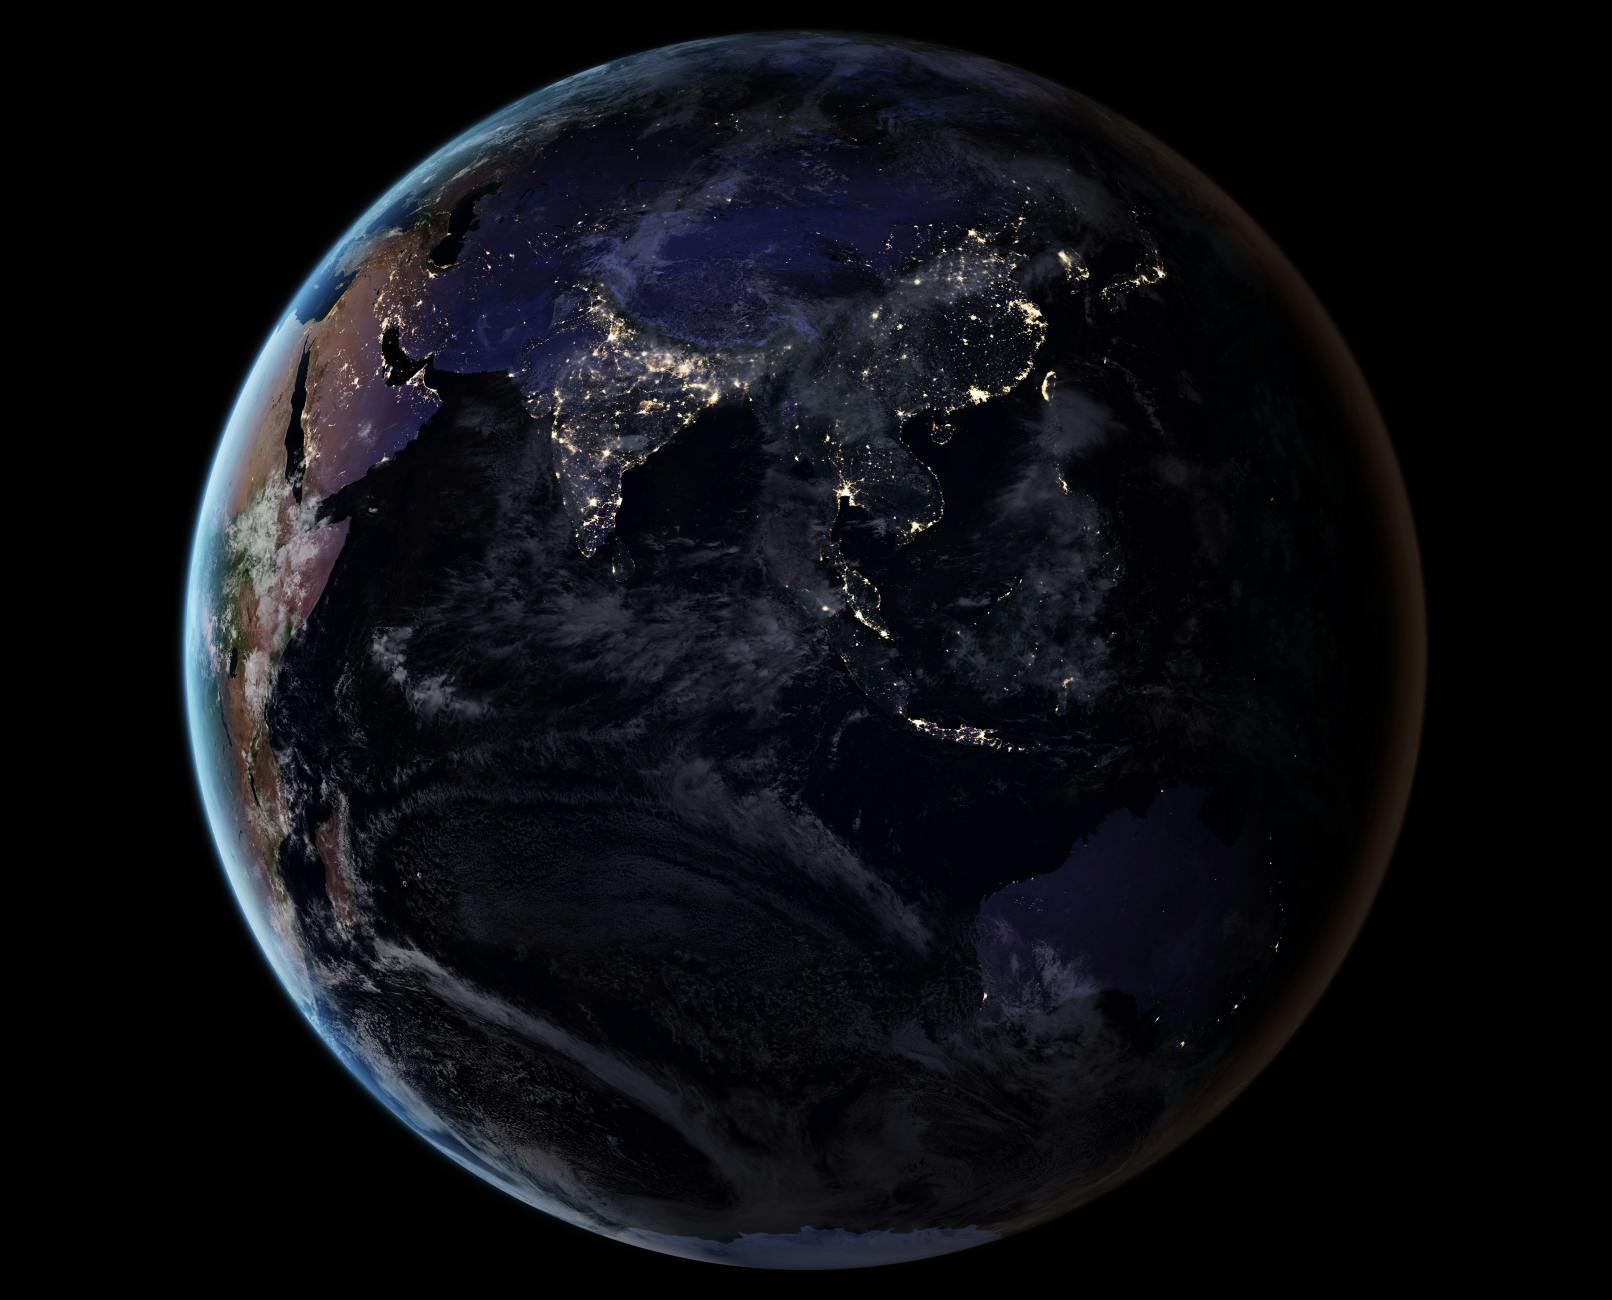 Earth from space in the night time, with visible light coming from human cities pockmarked on Earth